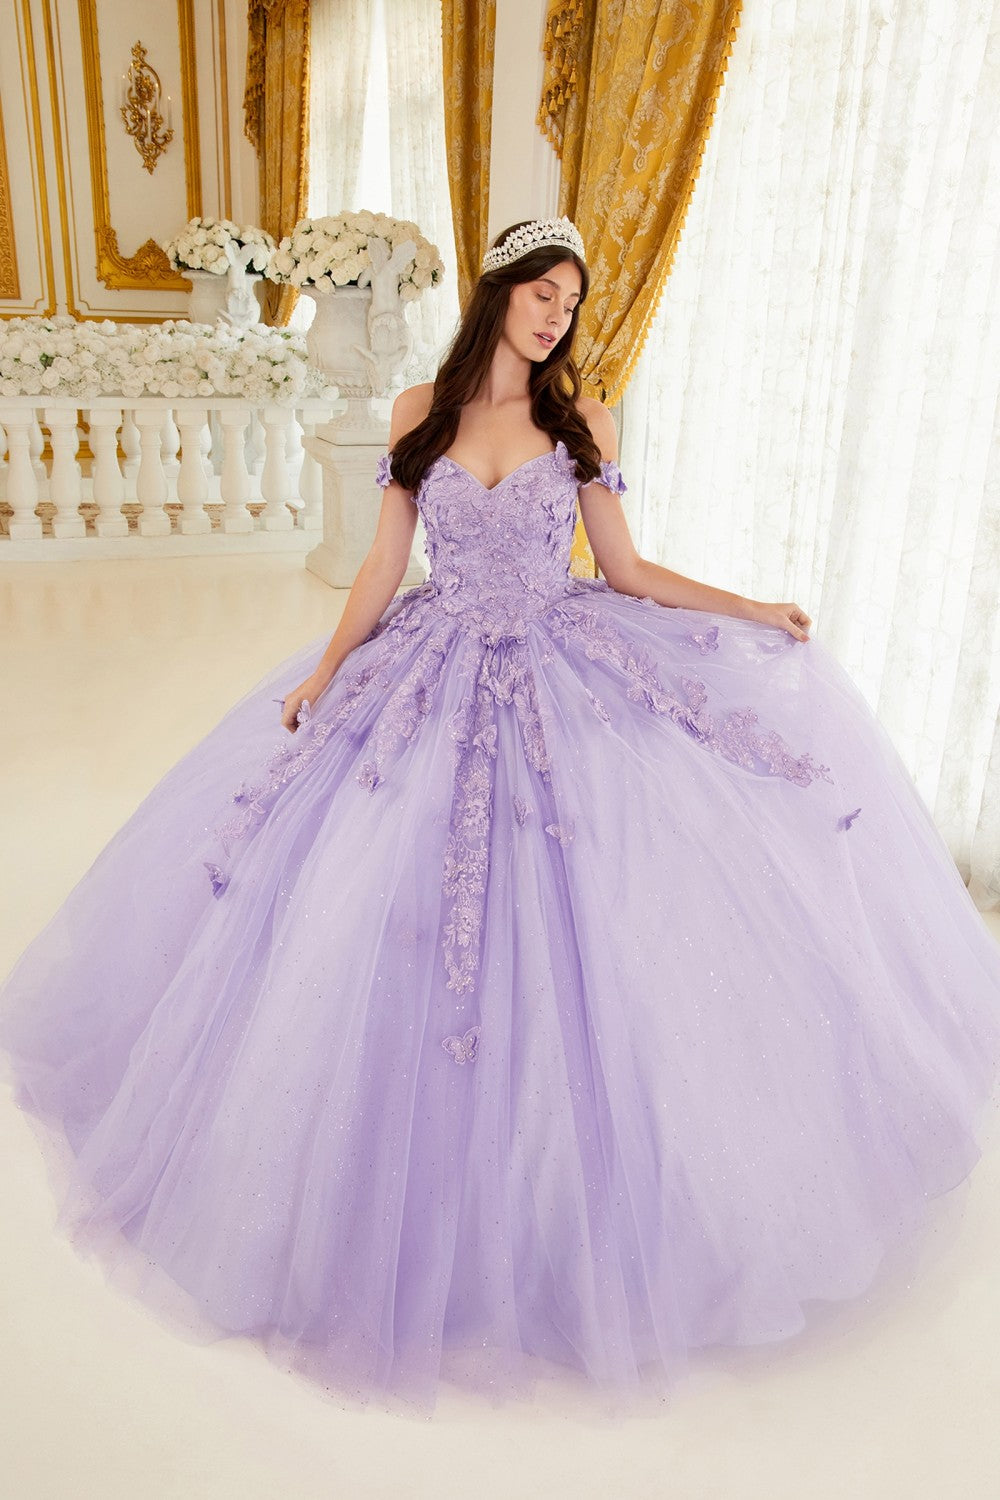 Lavender Layered Tulle Sweetheart Neckline Quinceanera Ball Gown 15709